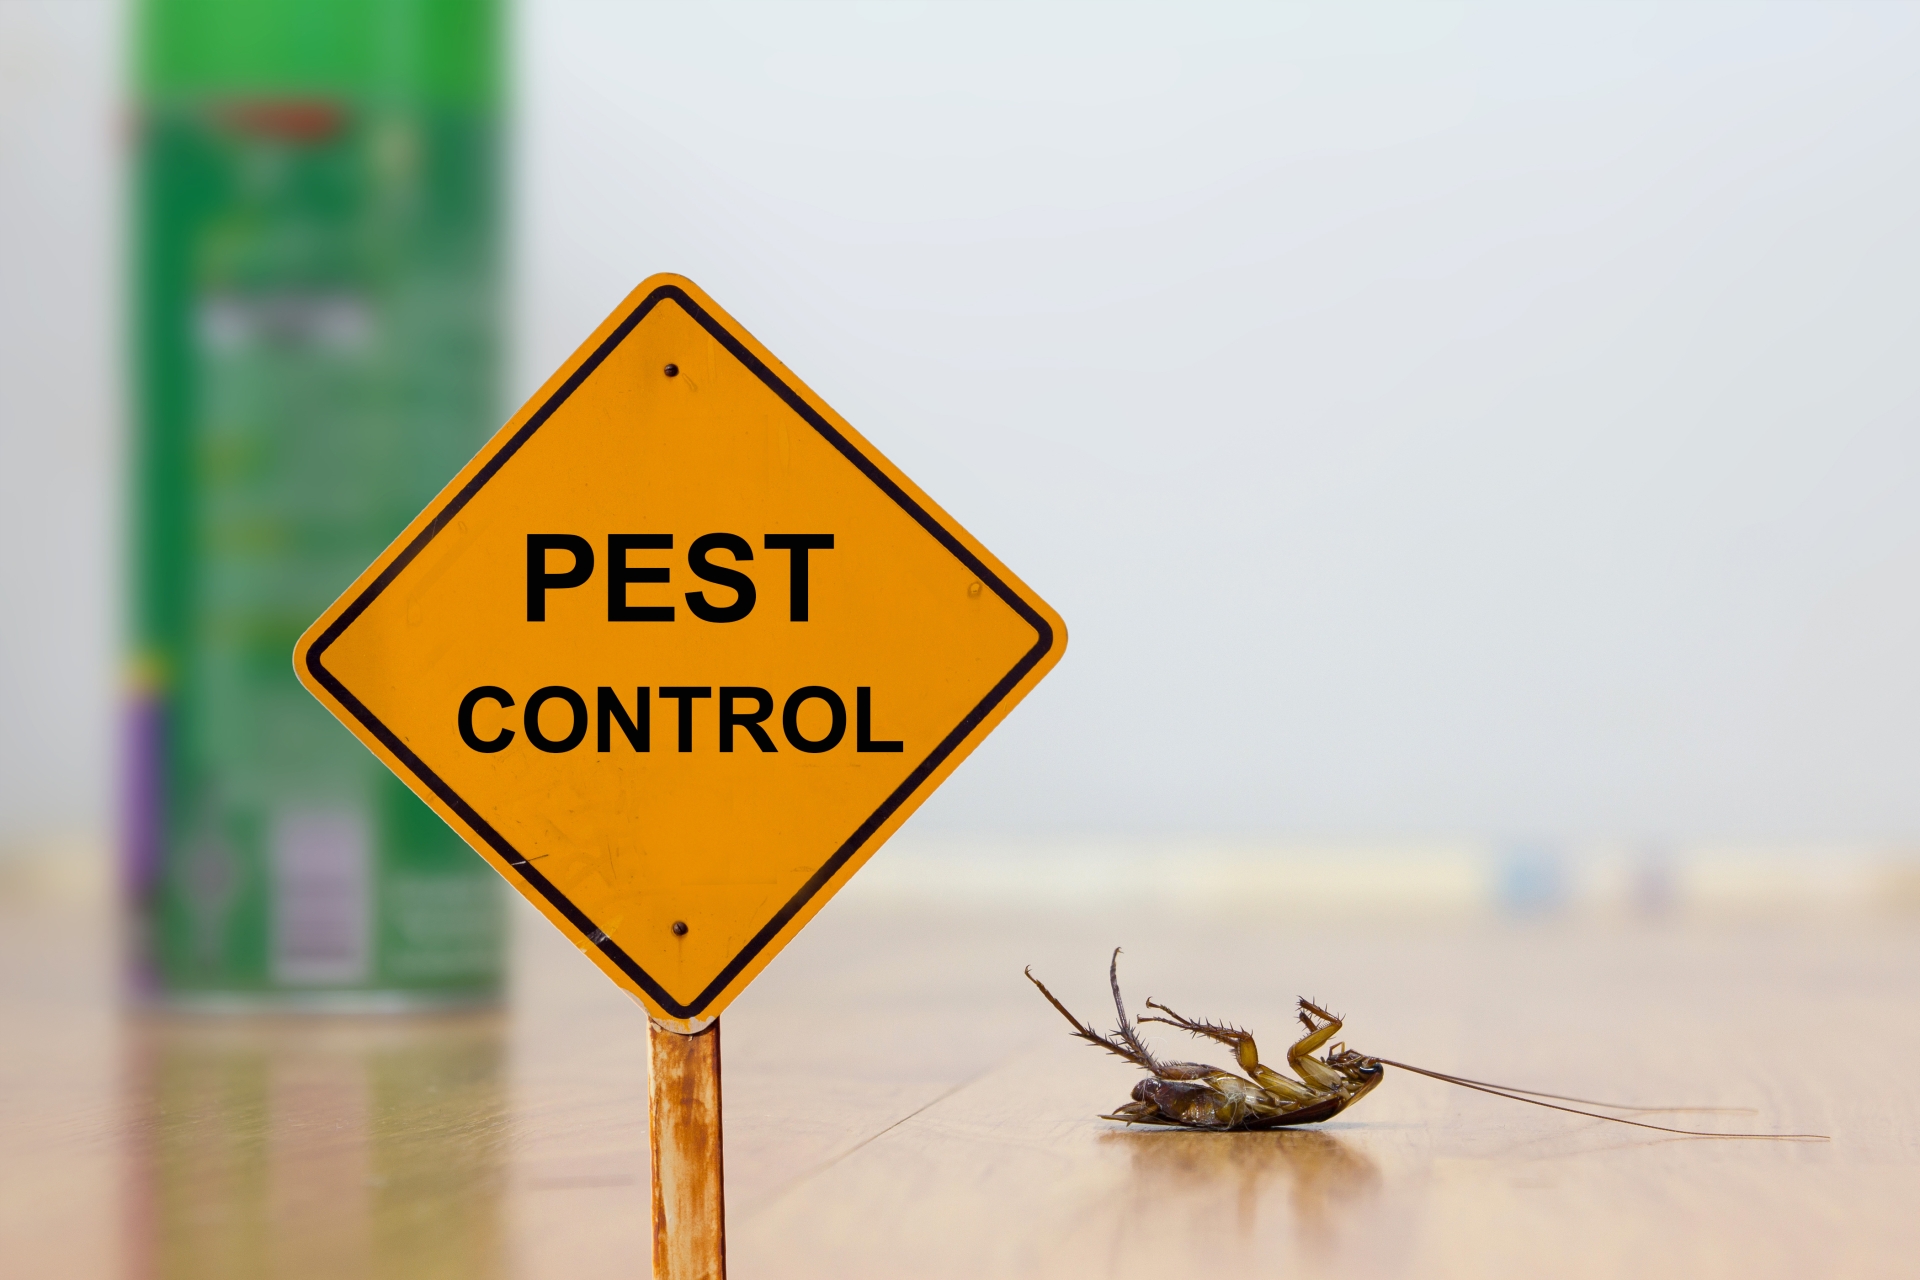 24 Hour Pest Control, Pest Control in Bromley, Bickley, Downham, BR1. Call Now 020 8166 9746